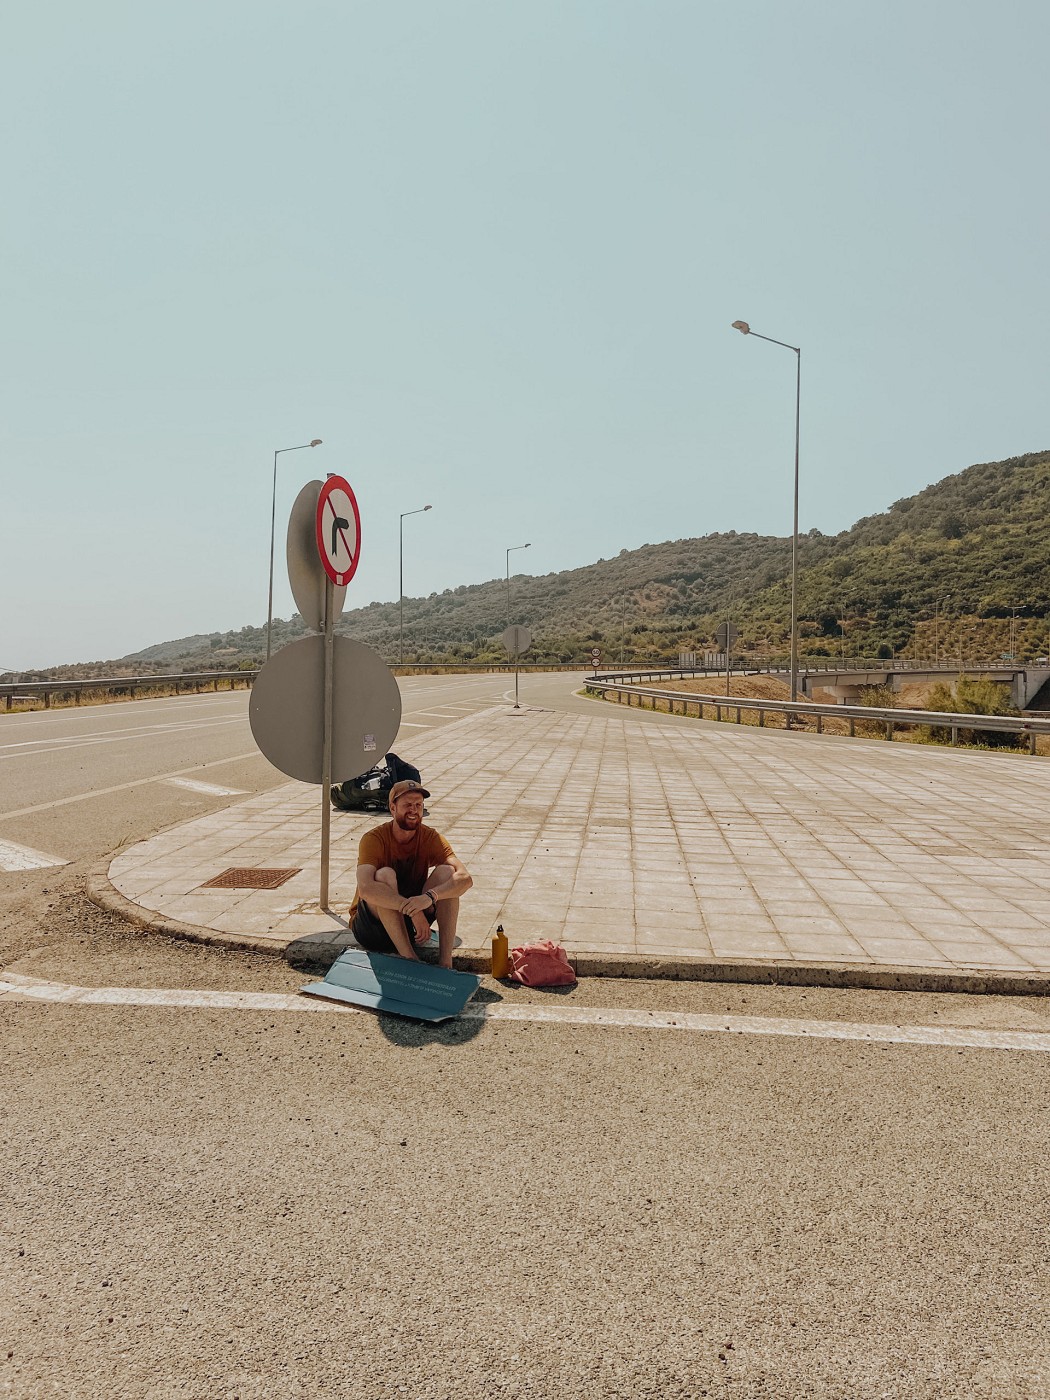 Flow right after losing the phone in Greece Stratos while hitchhiking